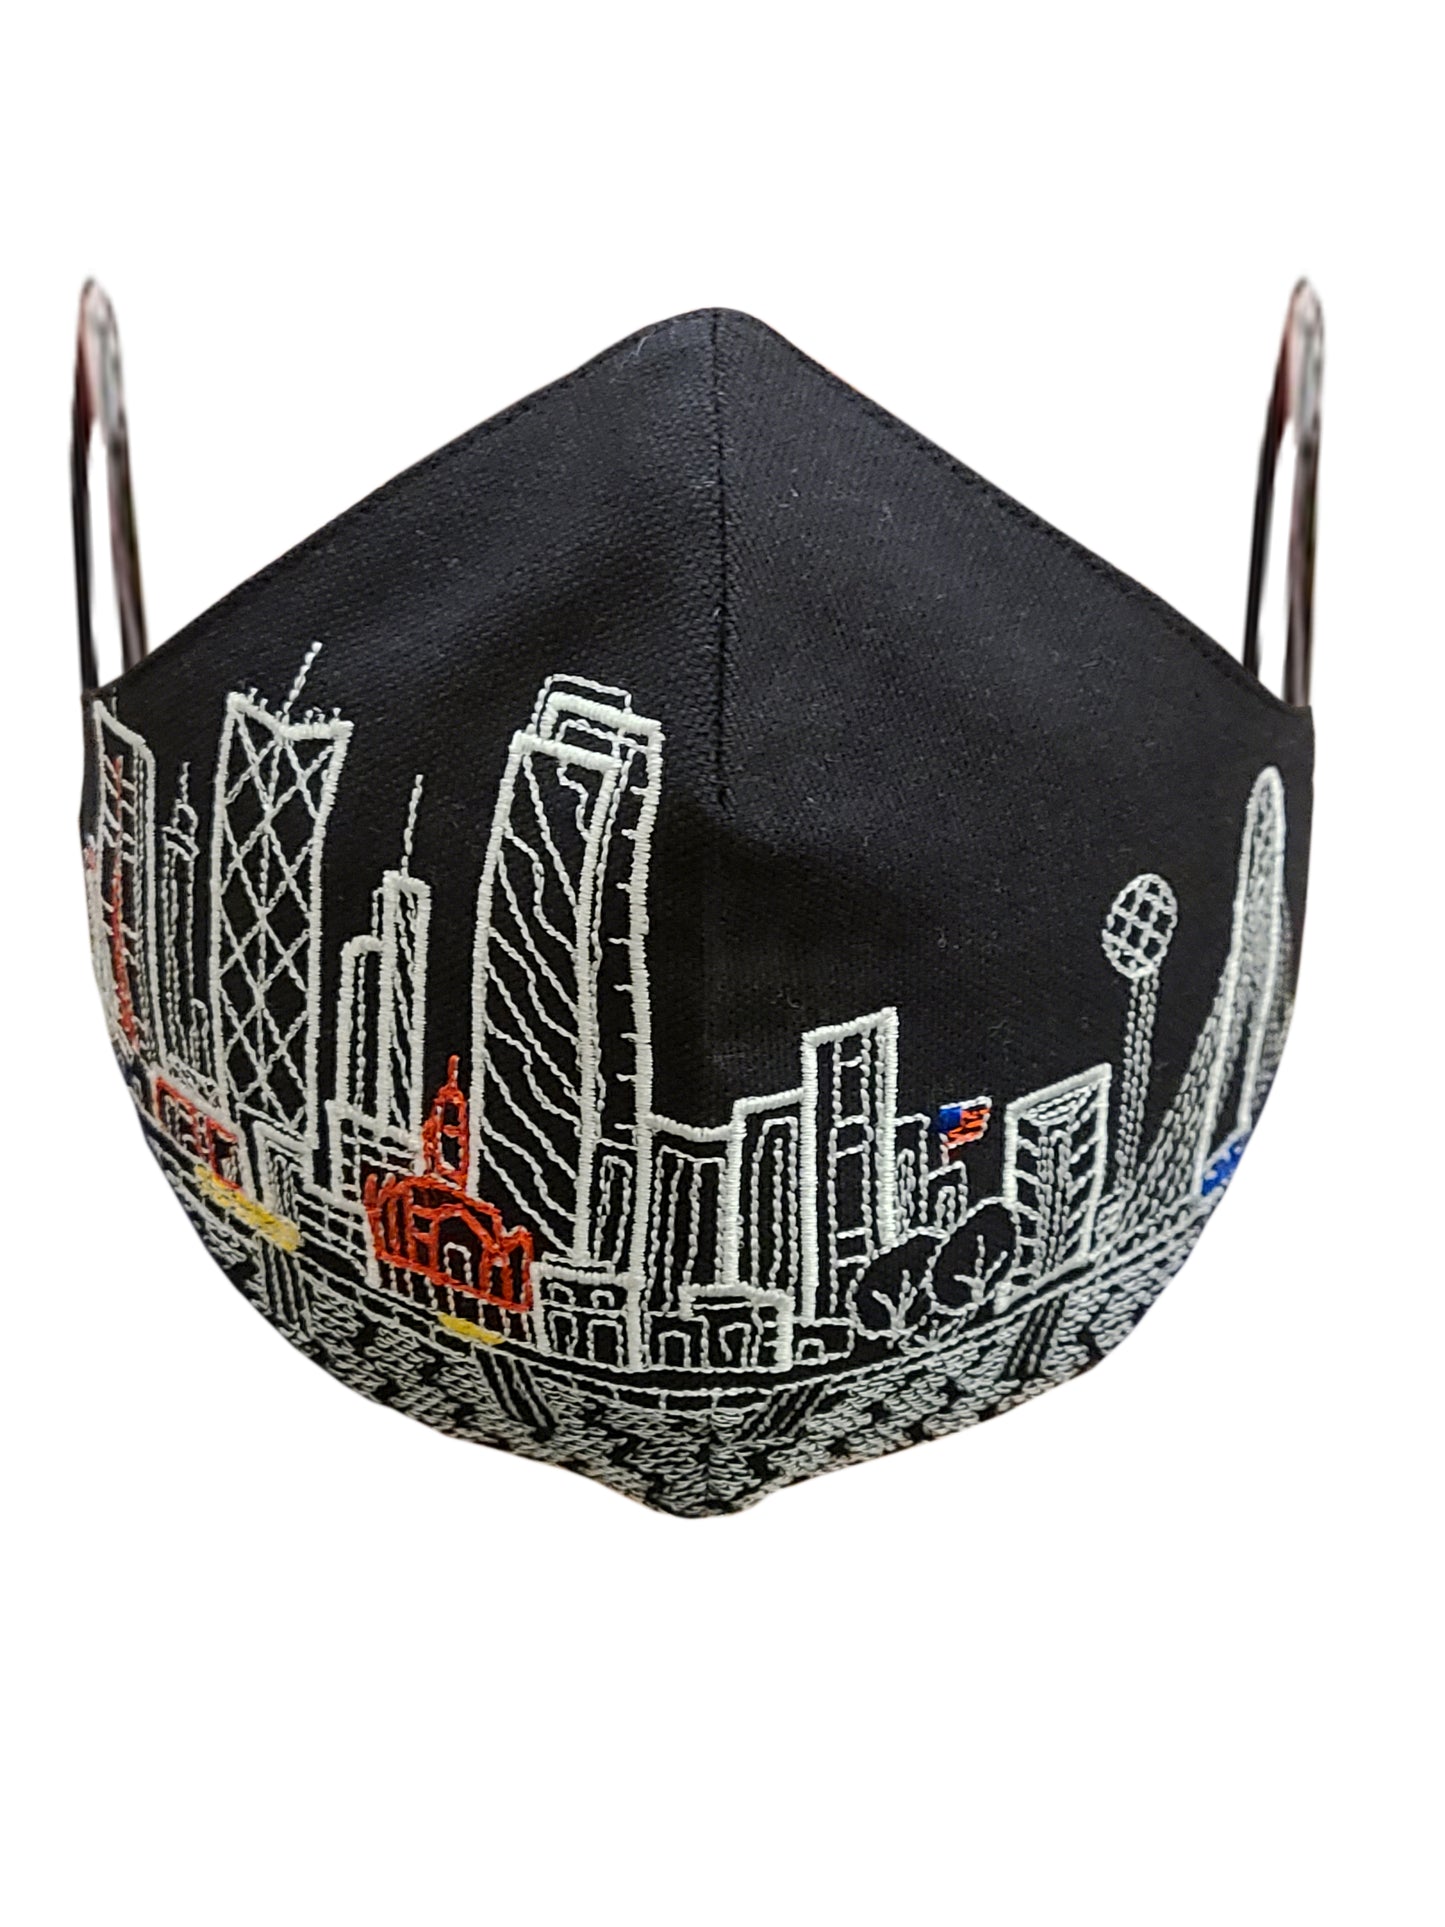 DALLAS EMBROIDERED SKYLINE FACE MASK